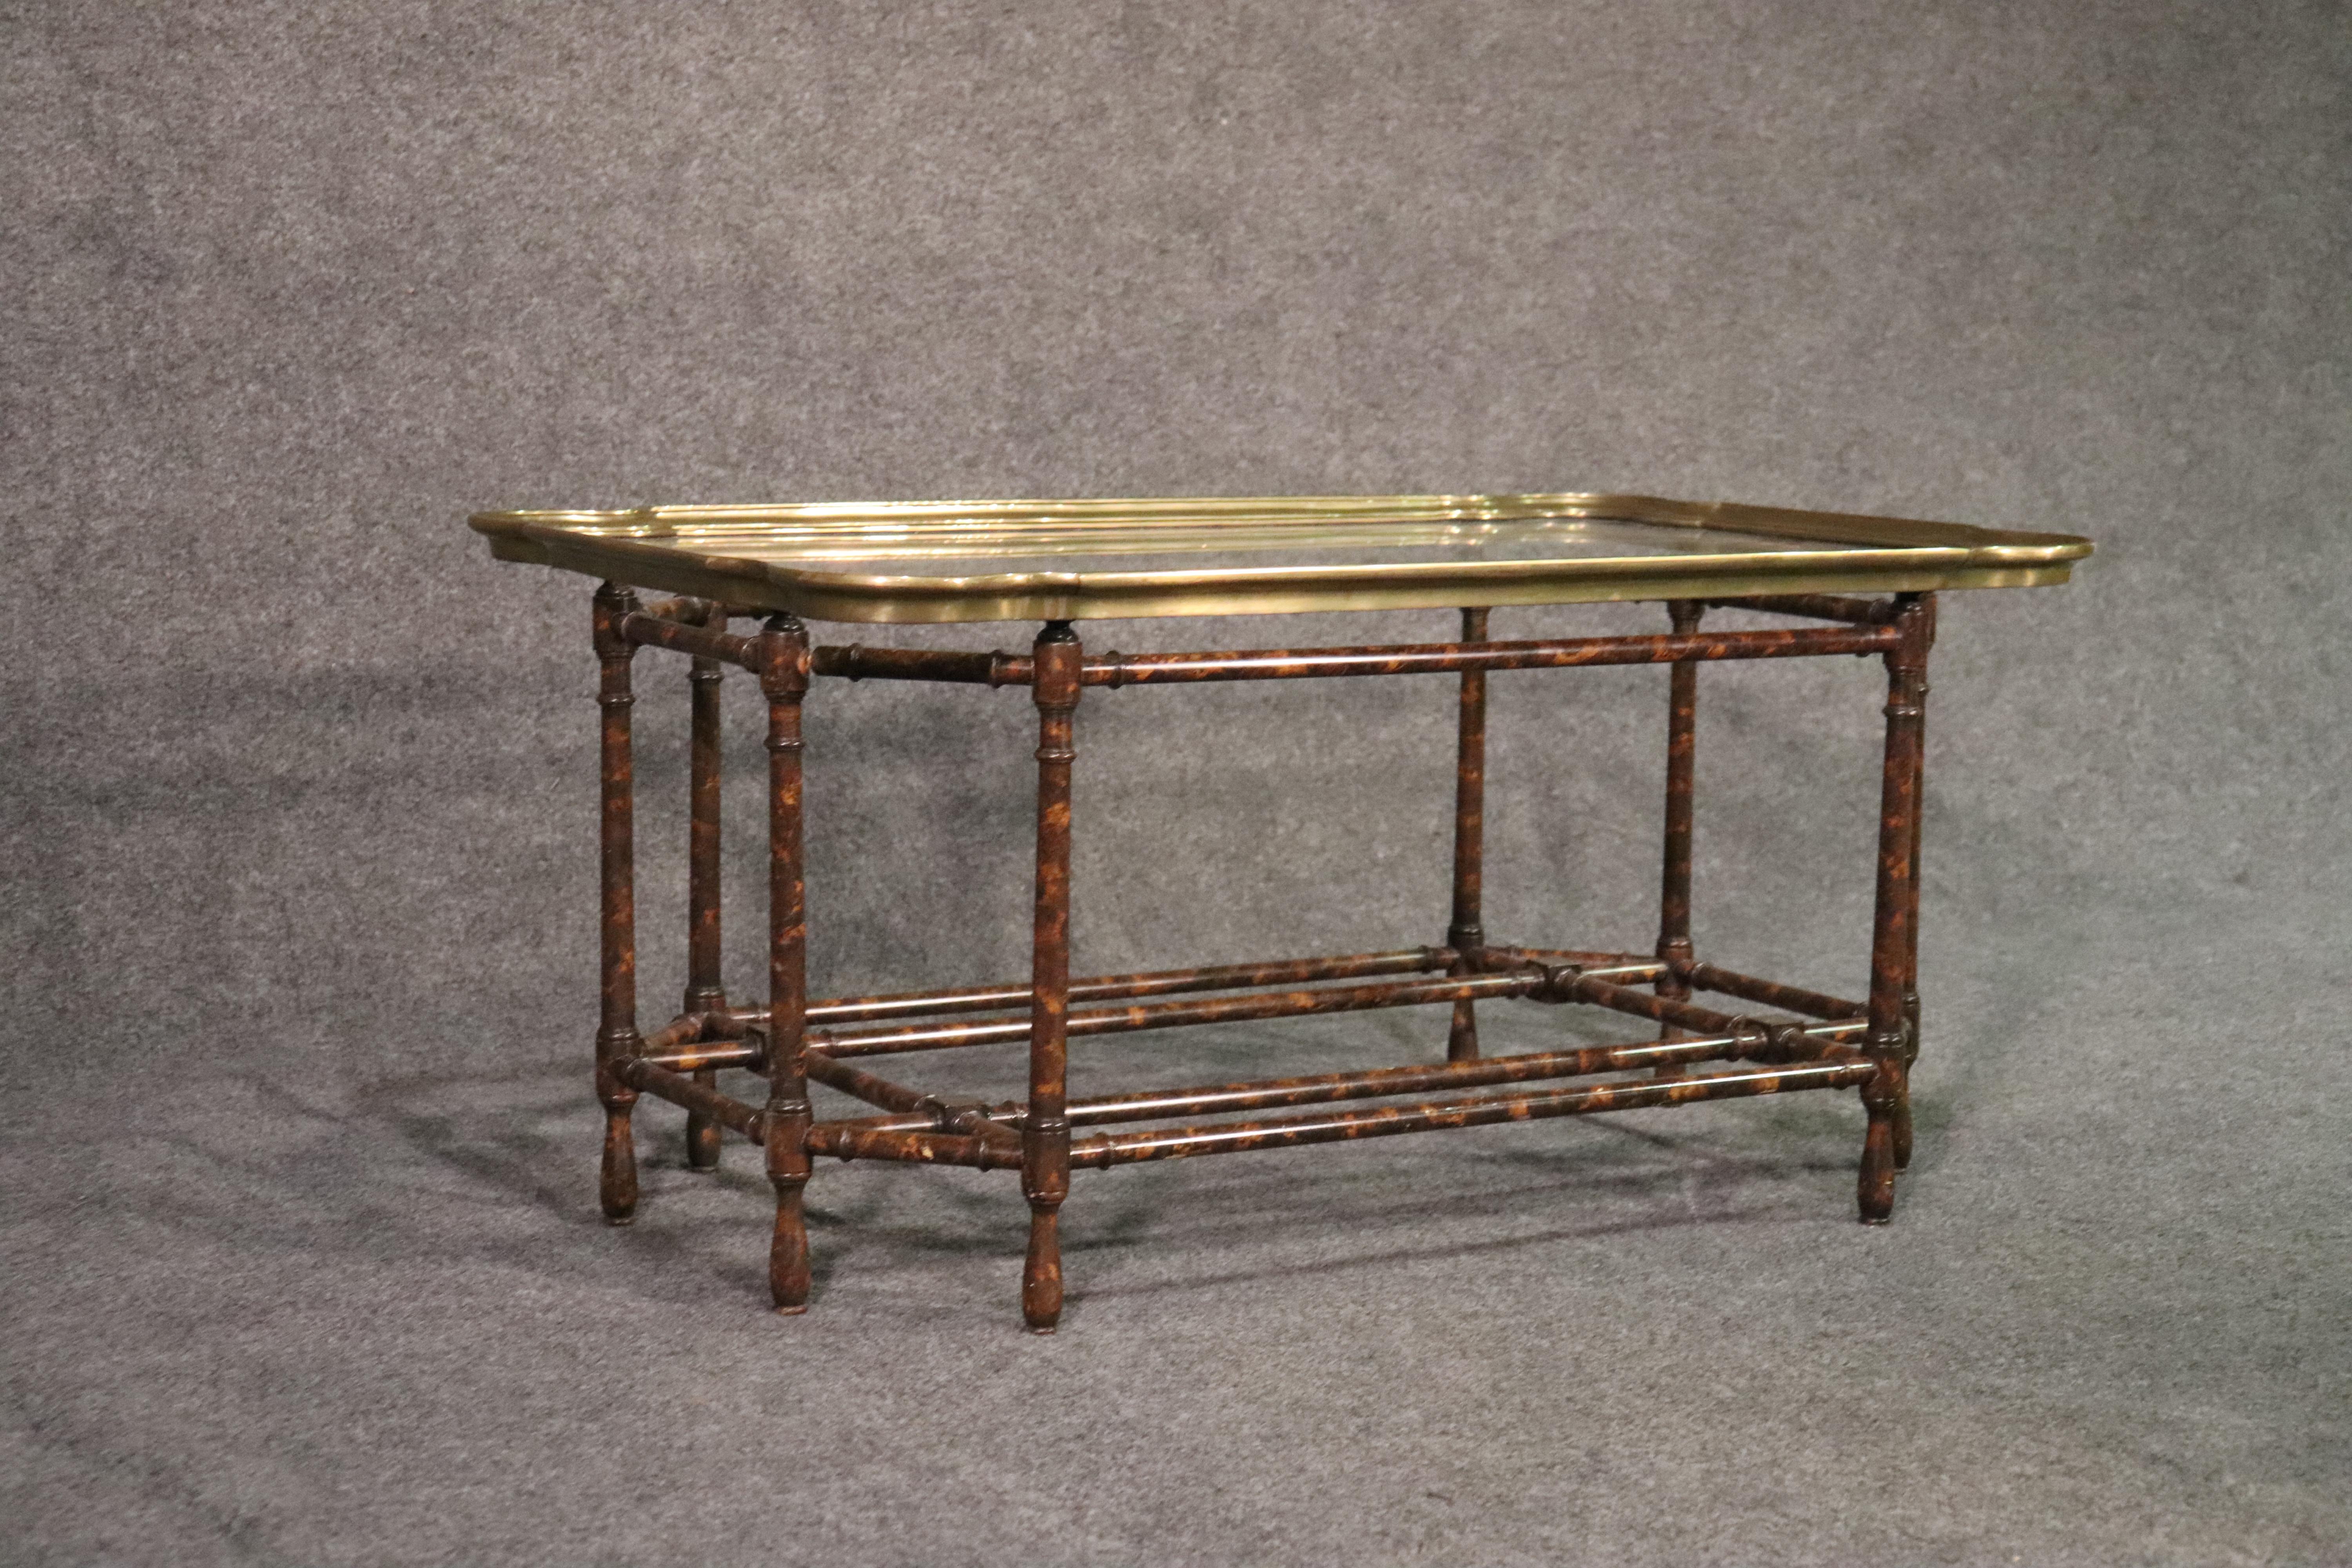 This is a classic brass tray top coffee table. The table is in good condition and has no major issues. The table top has fine scratches from use but nothing serious. The table dates to the 1960s and measures 38 wide x 23.25 deep x 18.25 tall.